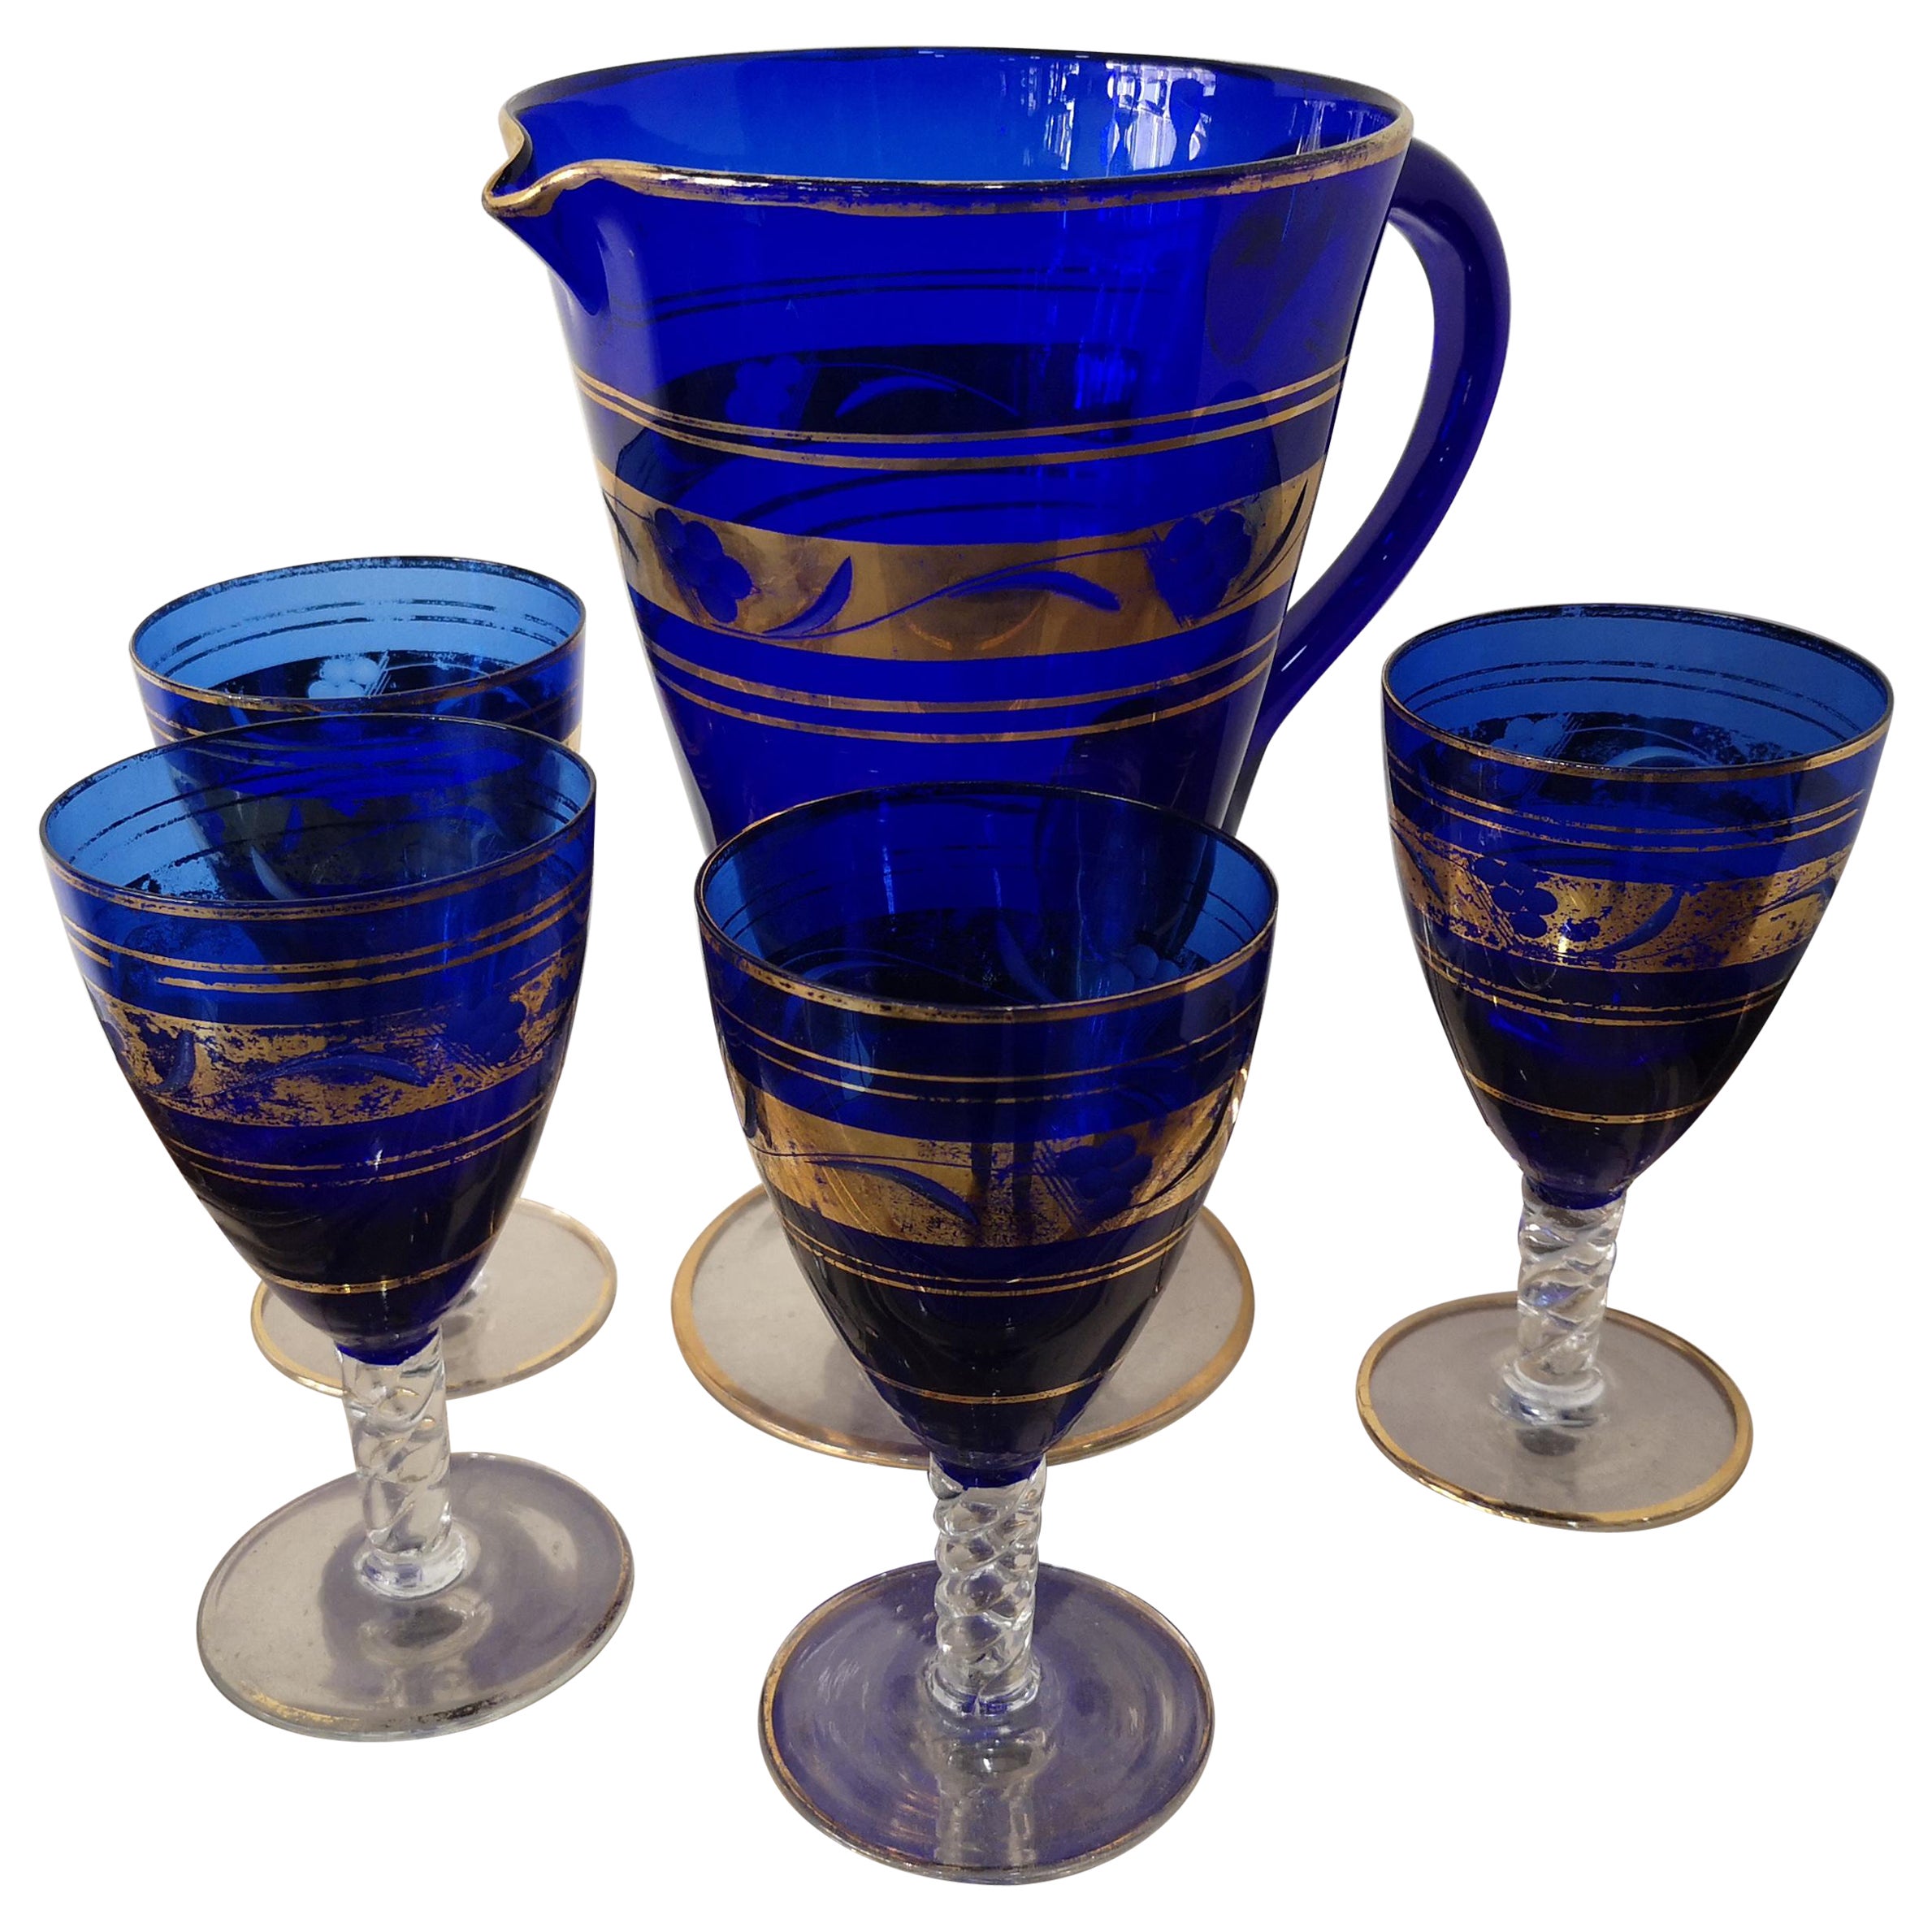 4 Cobalt blue and gold Murano glass tumblers and carafe, mid-19th century For Sale